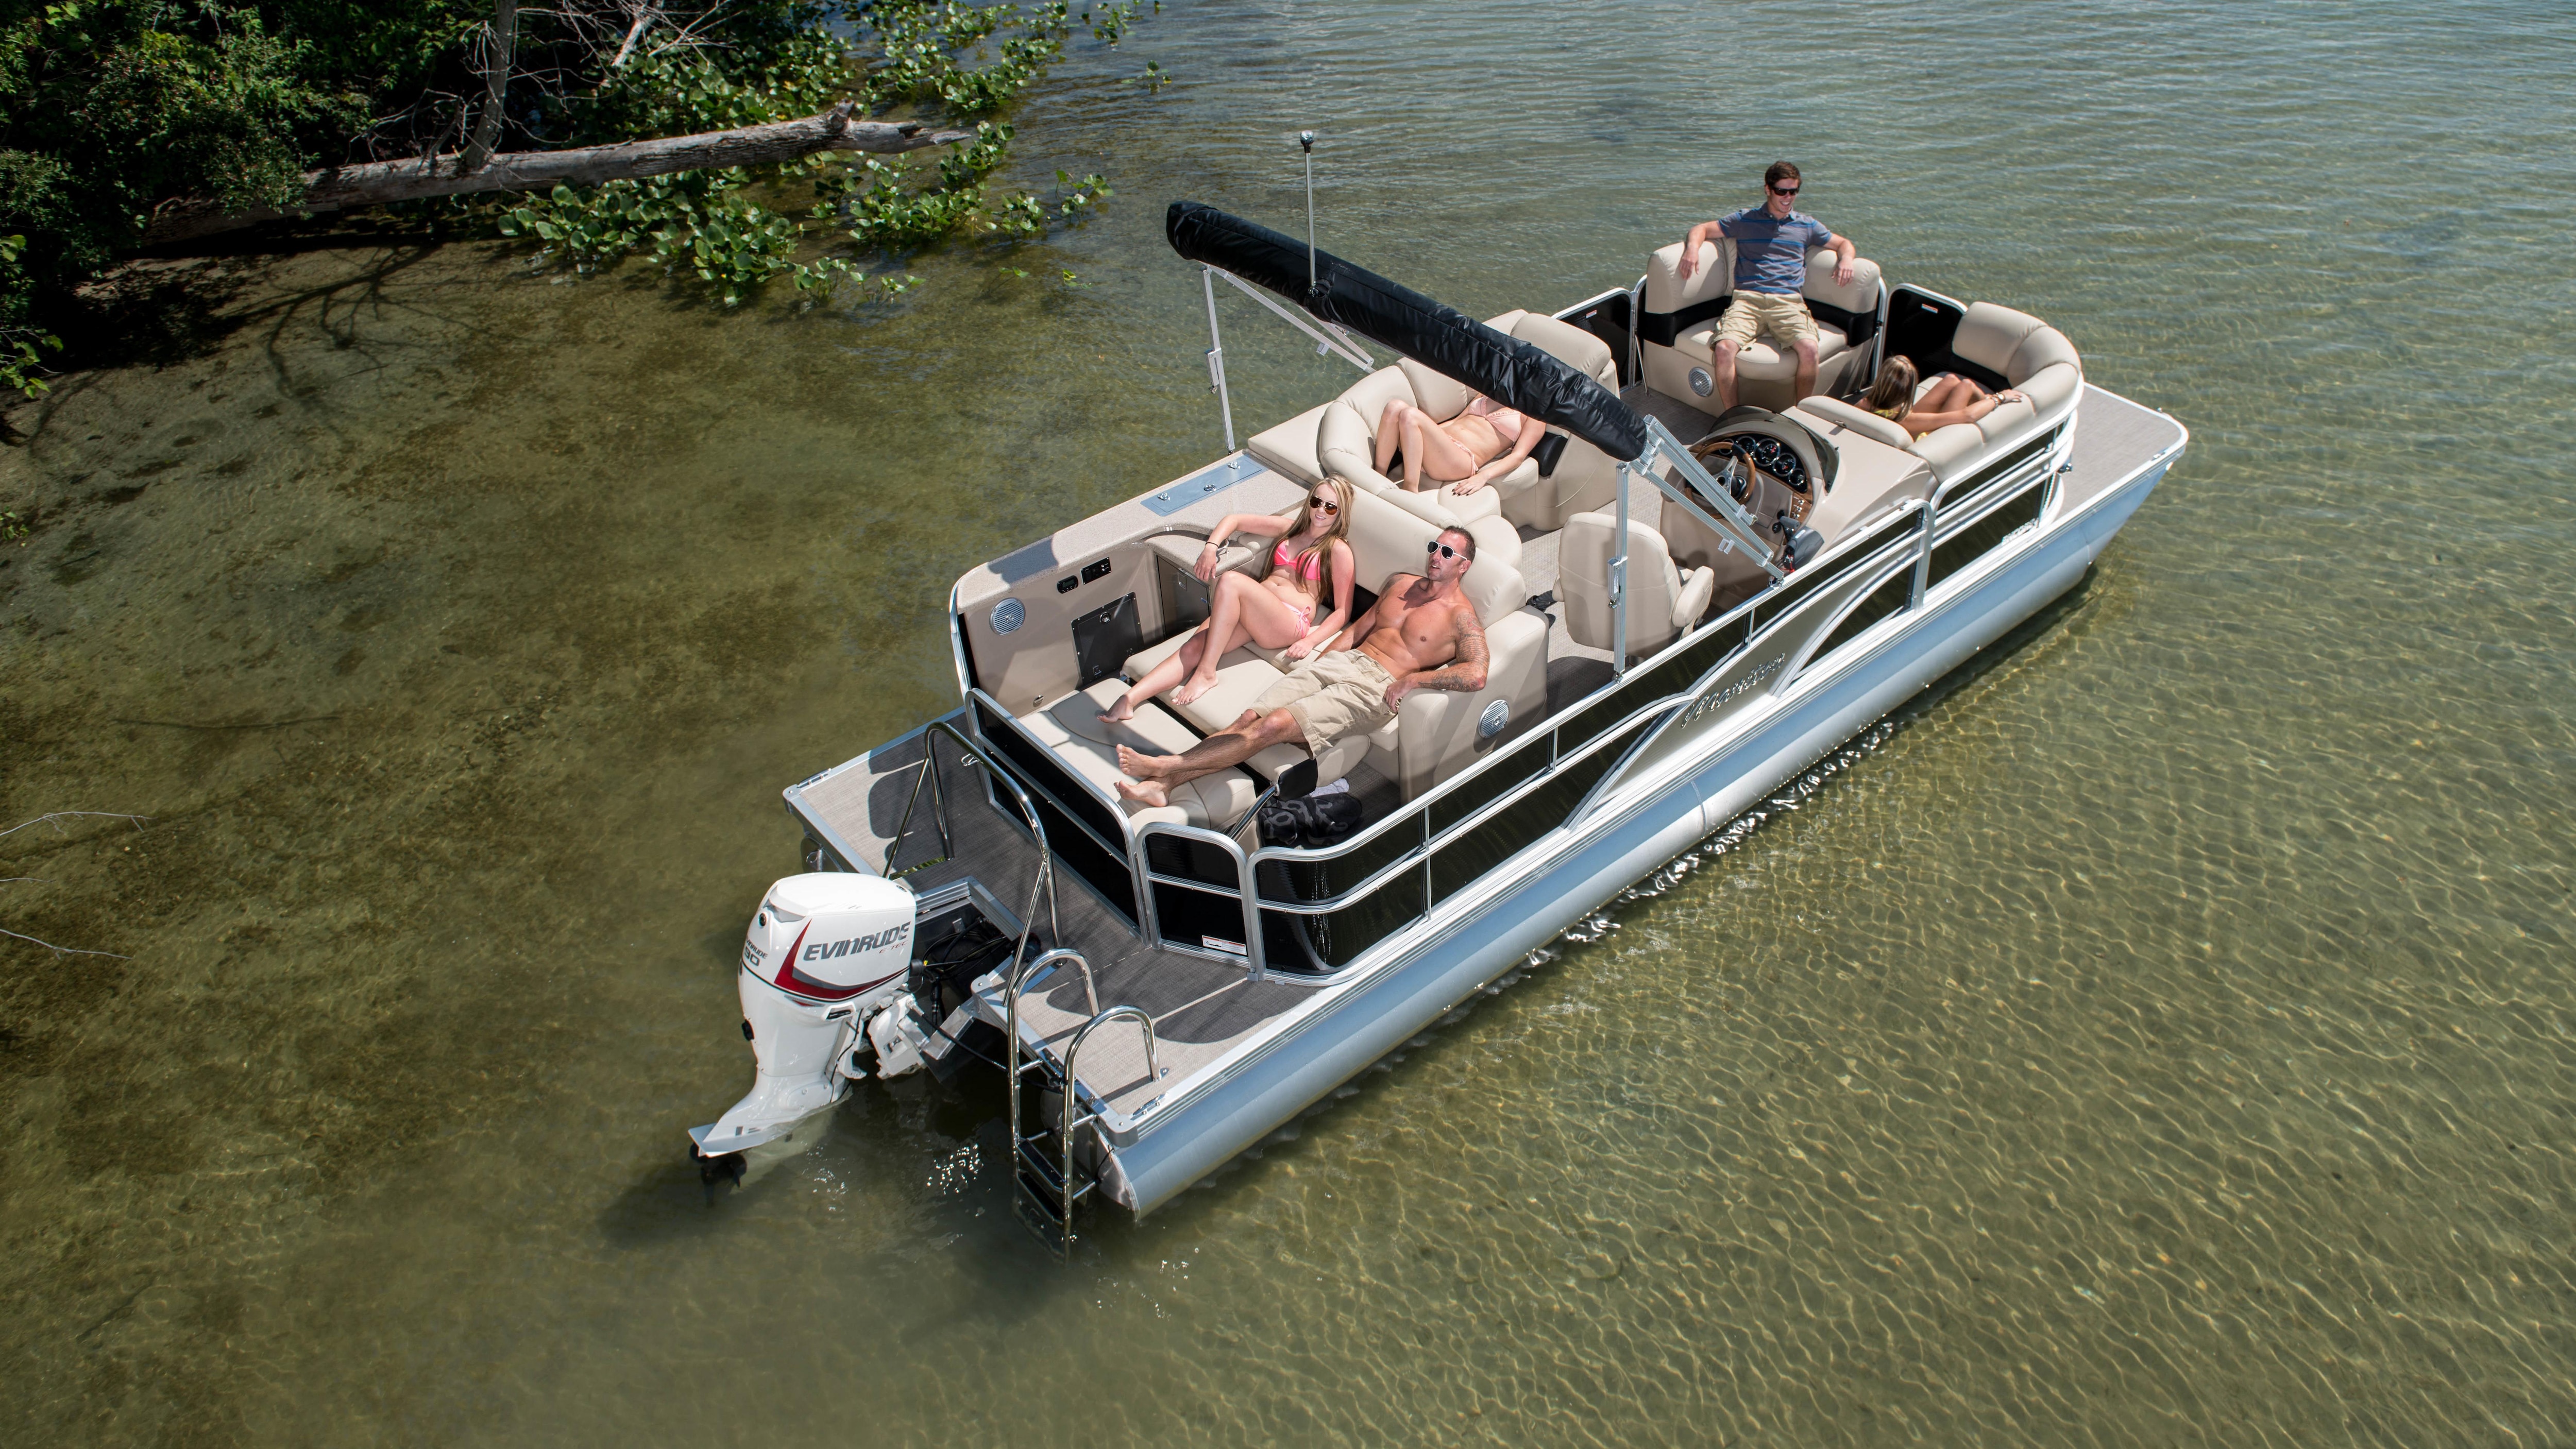 Group of friends relaxing on a pontoon